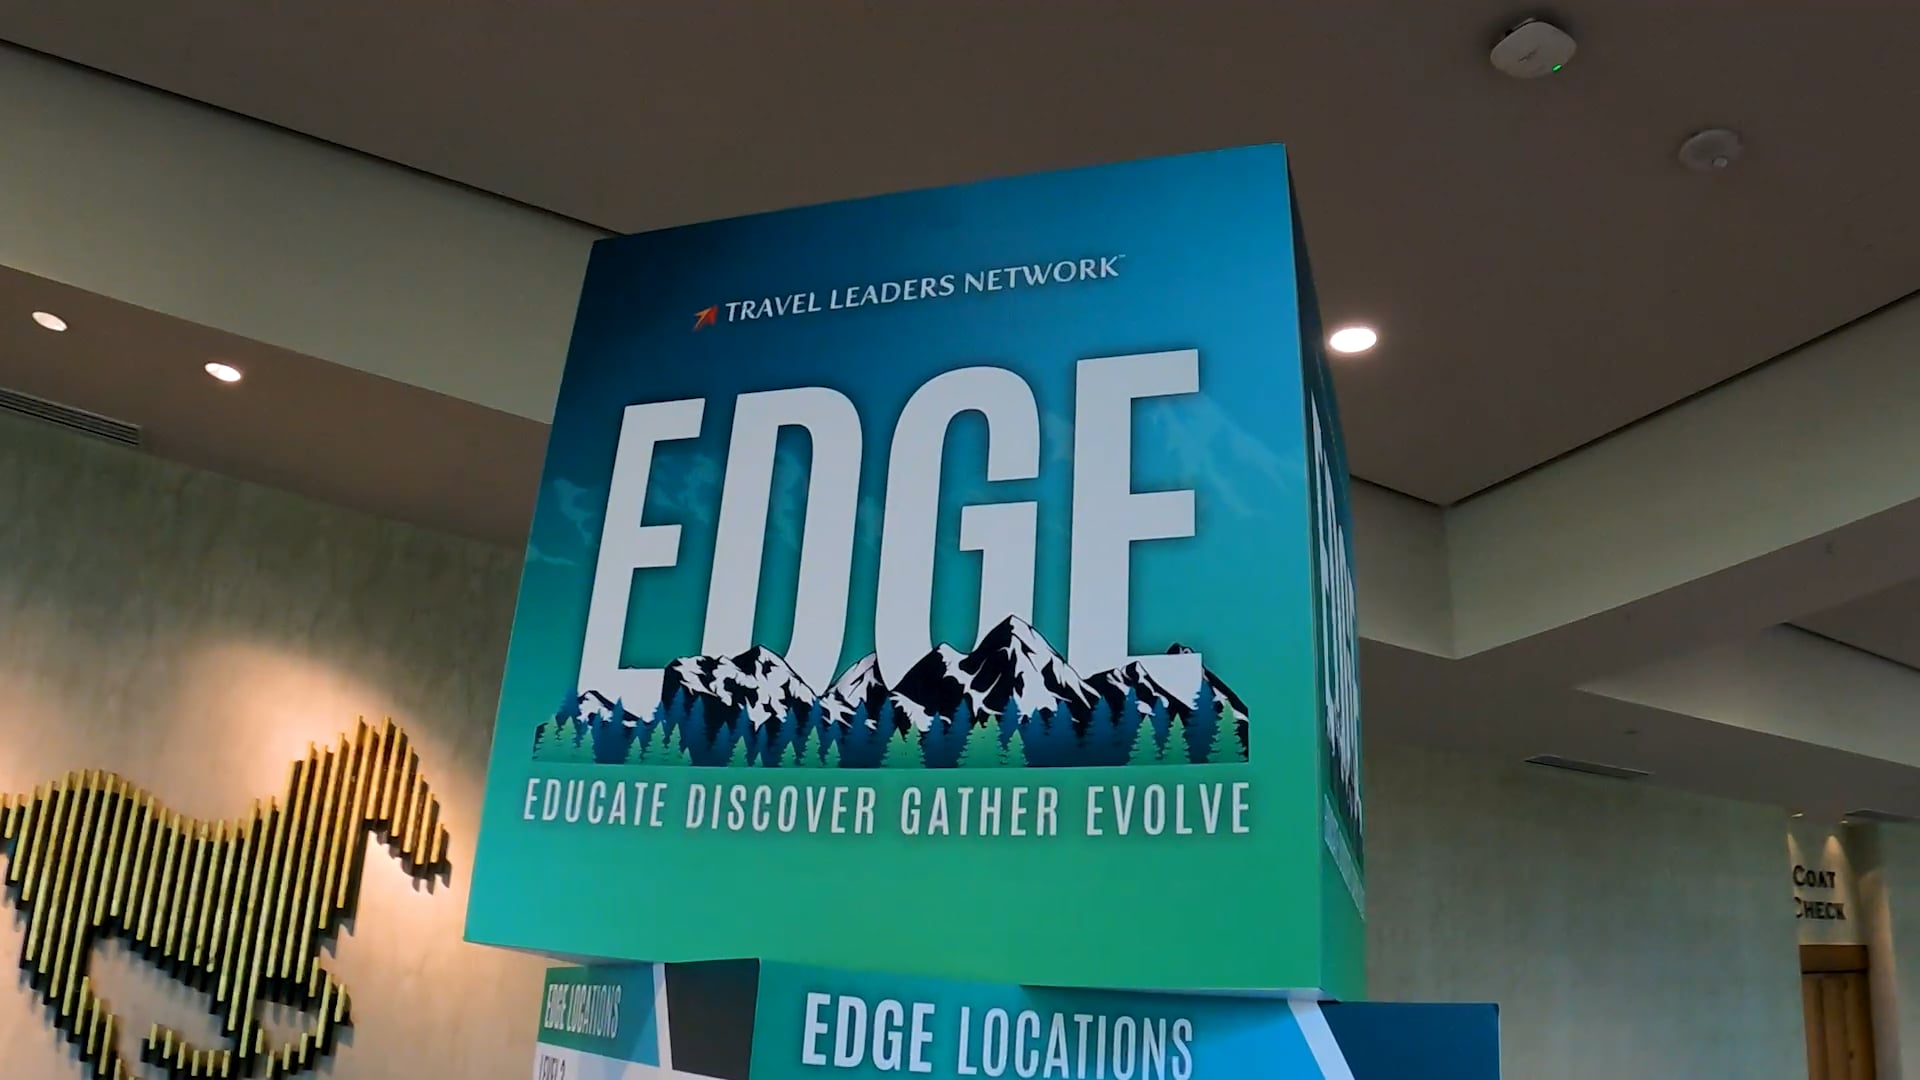 Travel Leaders Network EDGE 2022 Conference & Trade Show Recap on Vimeo